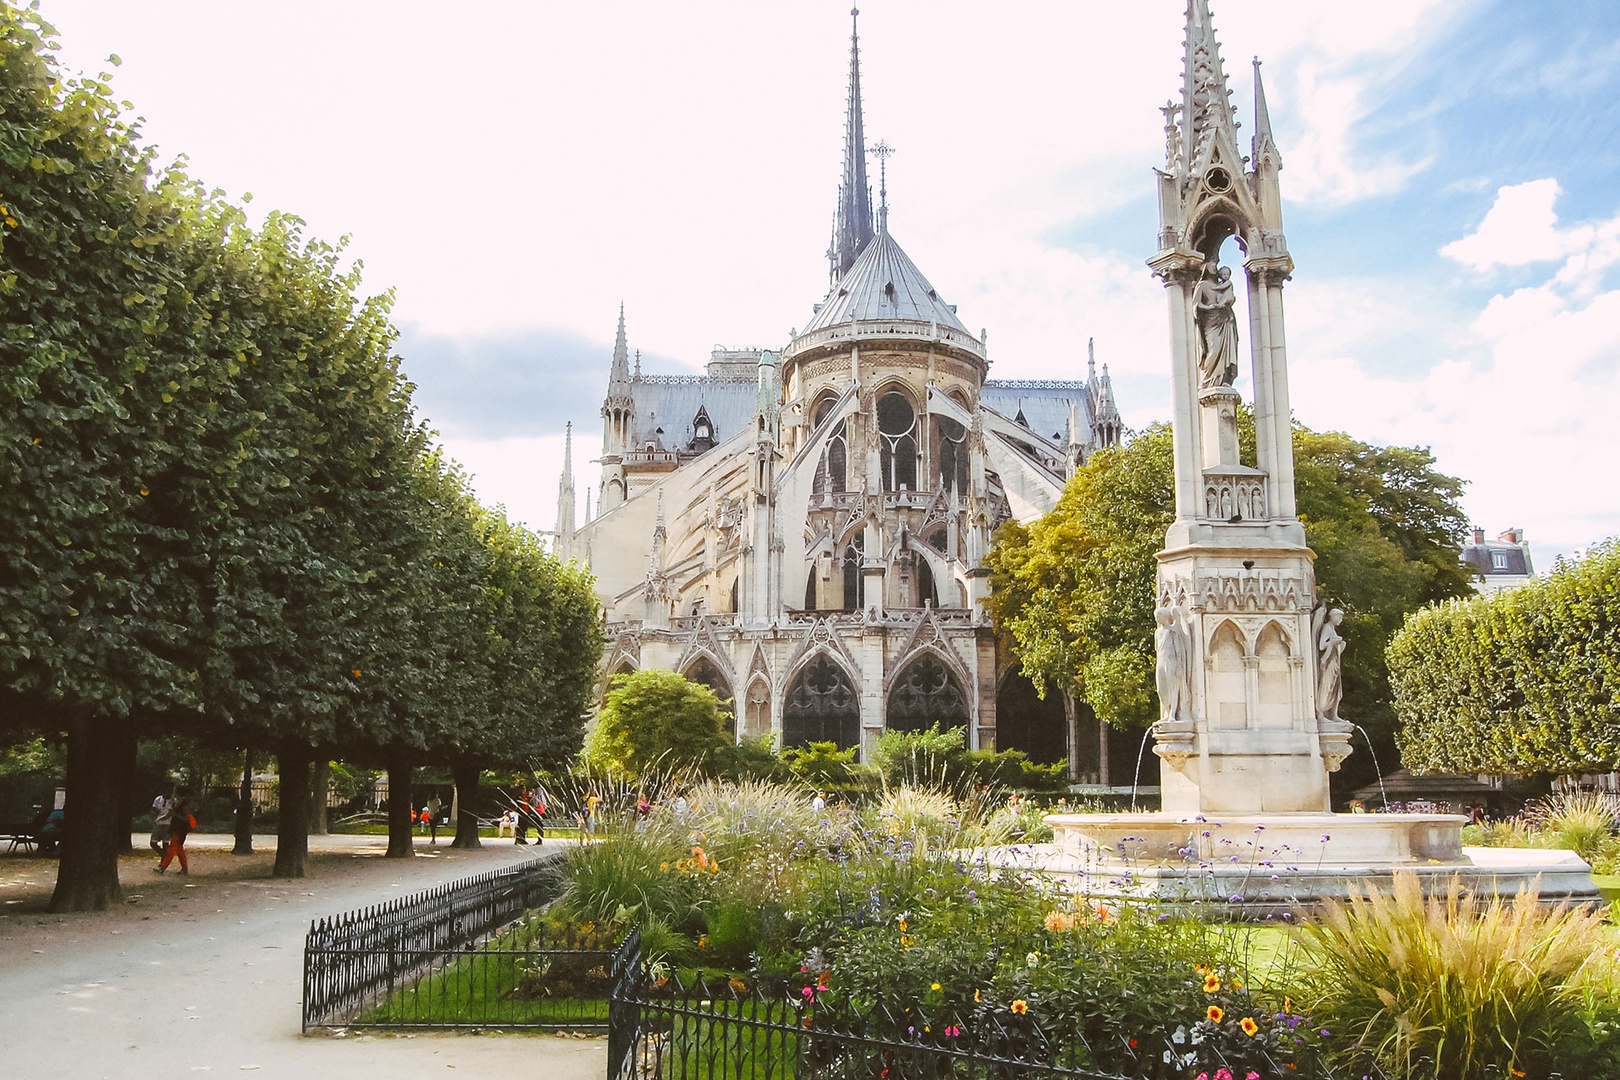 Walk over to the gardens of the Notre-Dame Cathedral